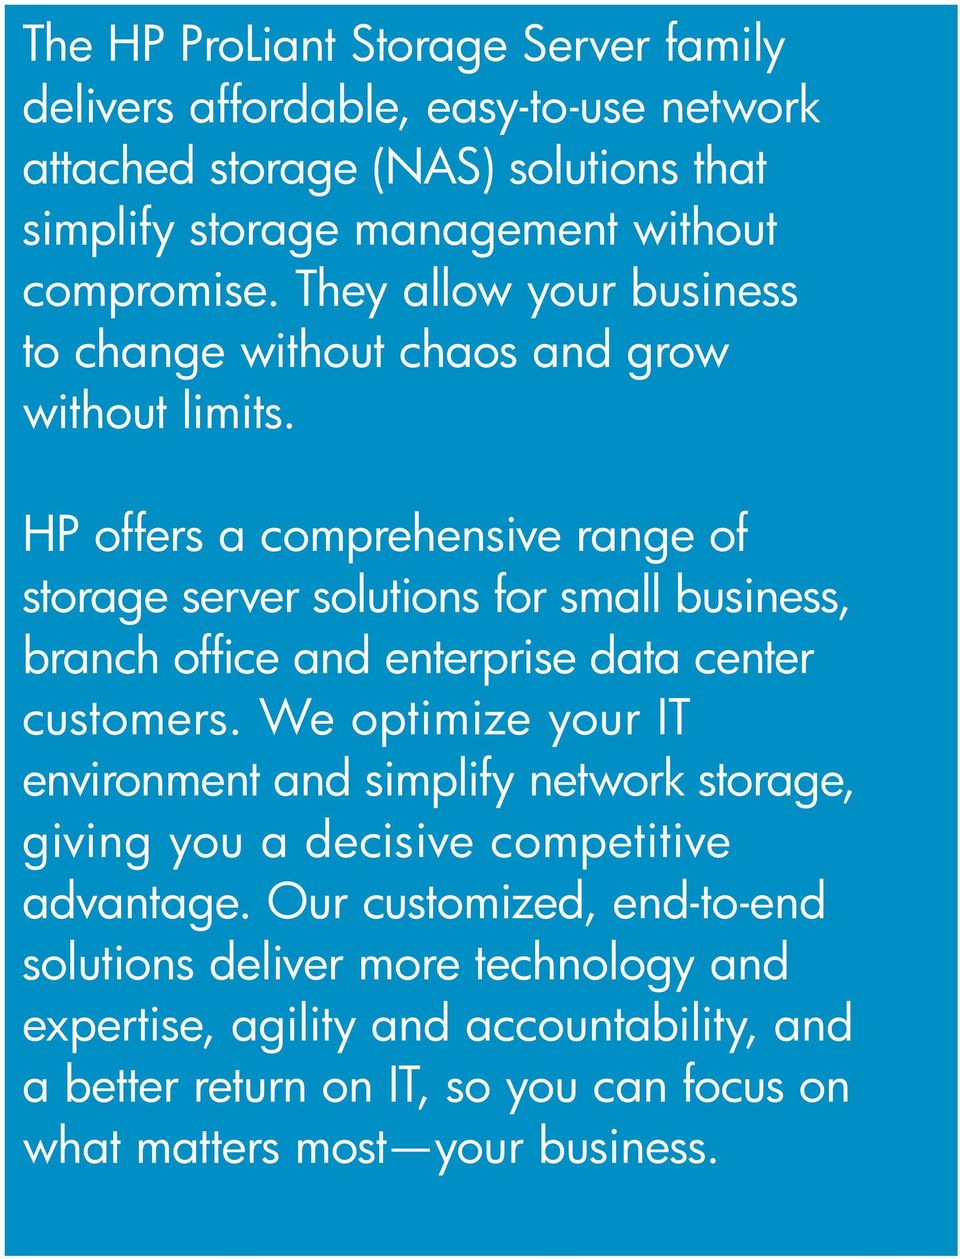 HP offers a comprehensive range of storage server solutions for small business, branch office and enterprise data center customers.